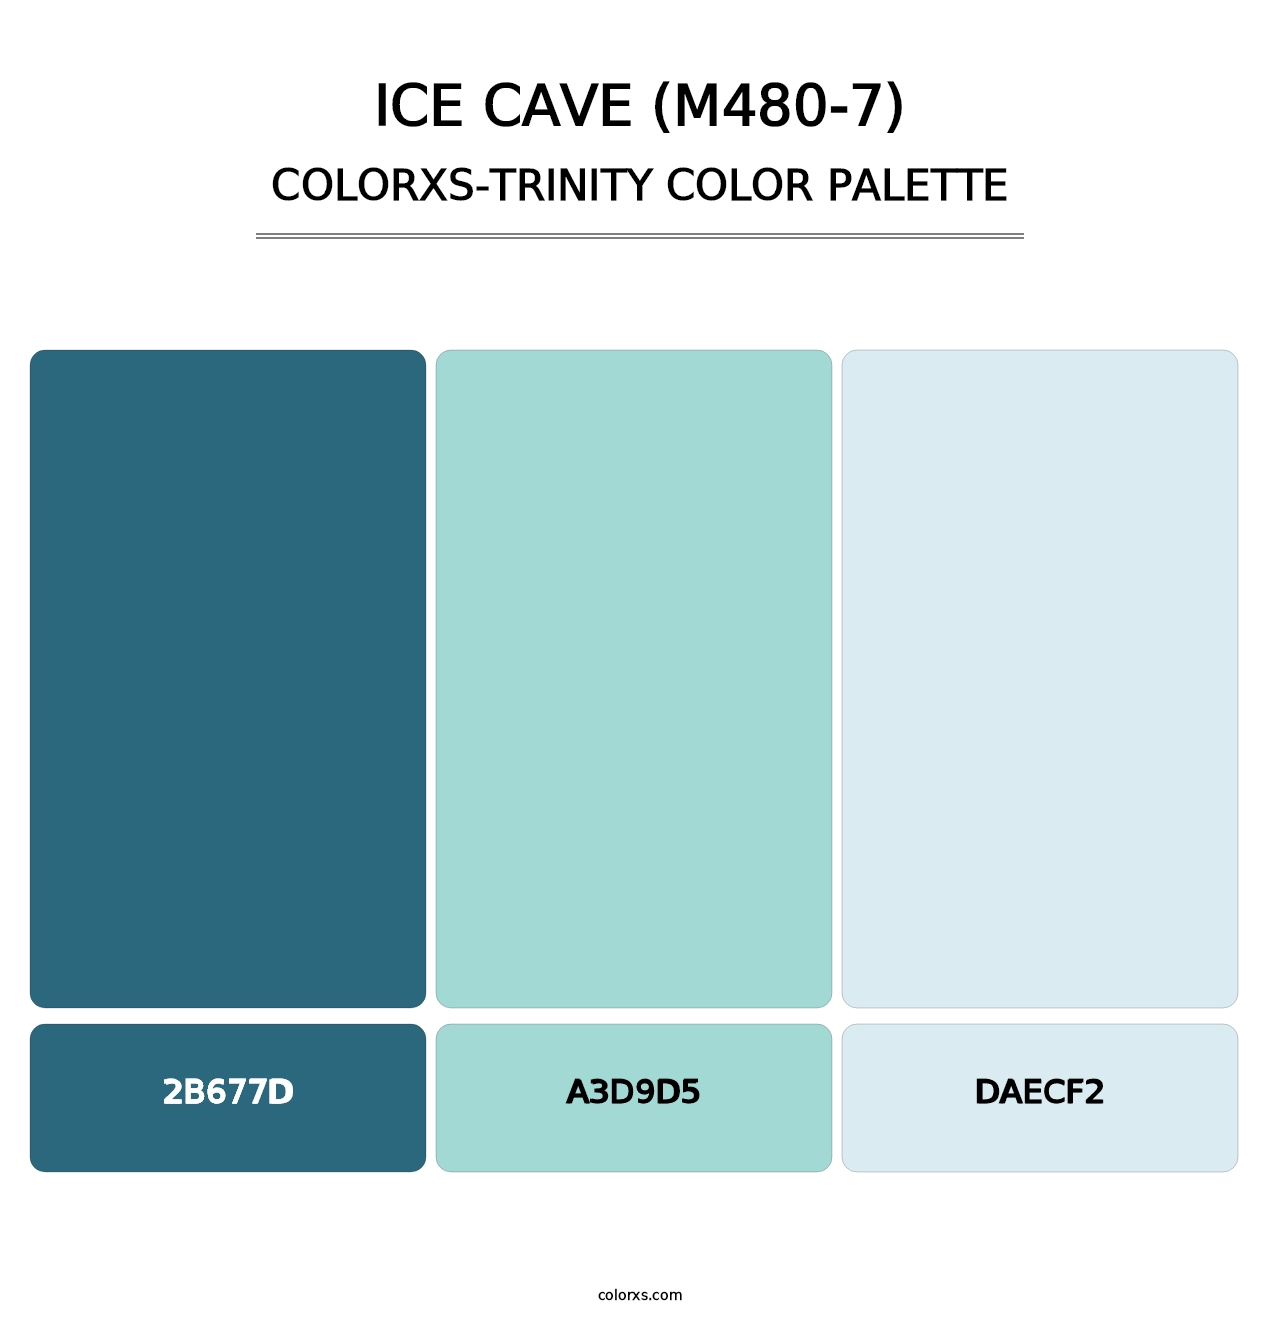 Ice Cave (M480-7) - Colorxs Trinity Palette